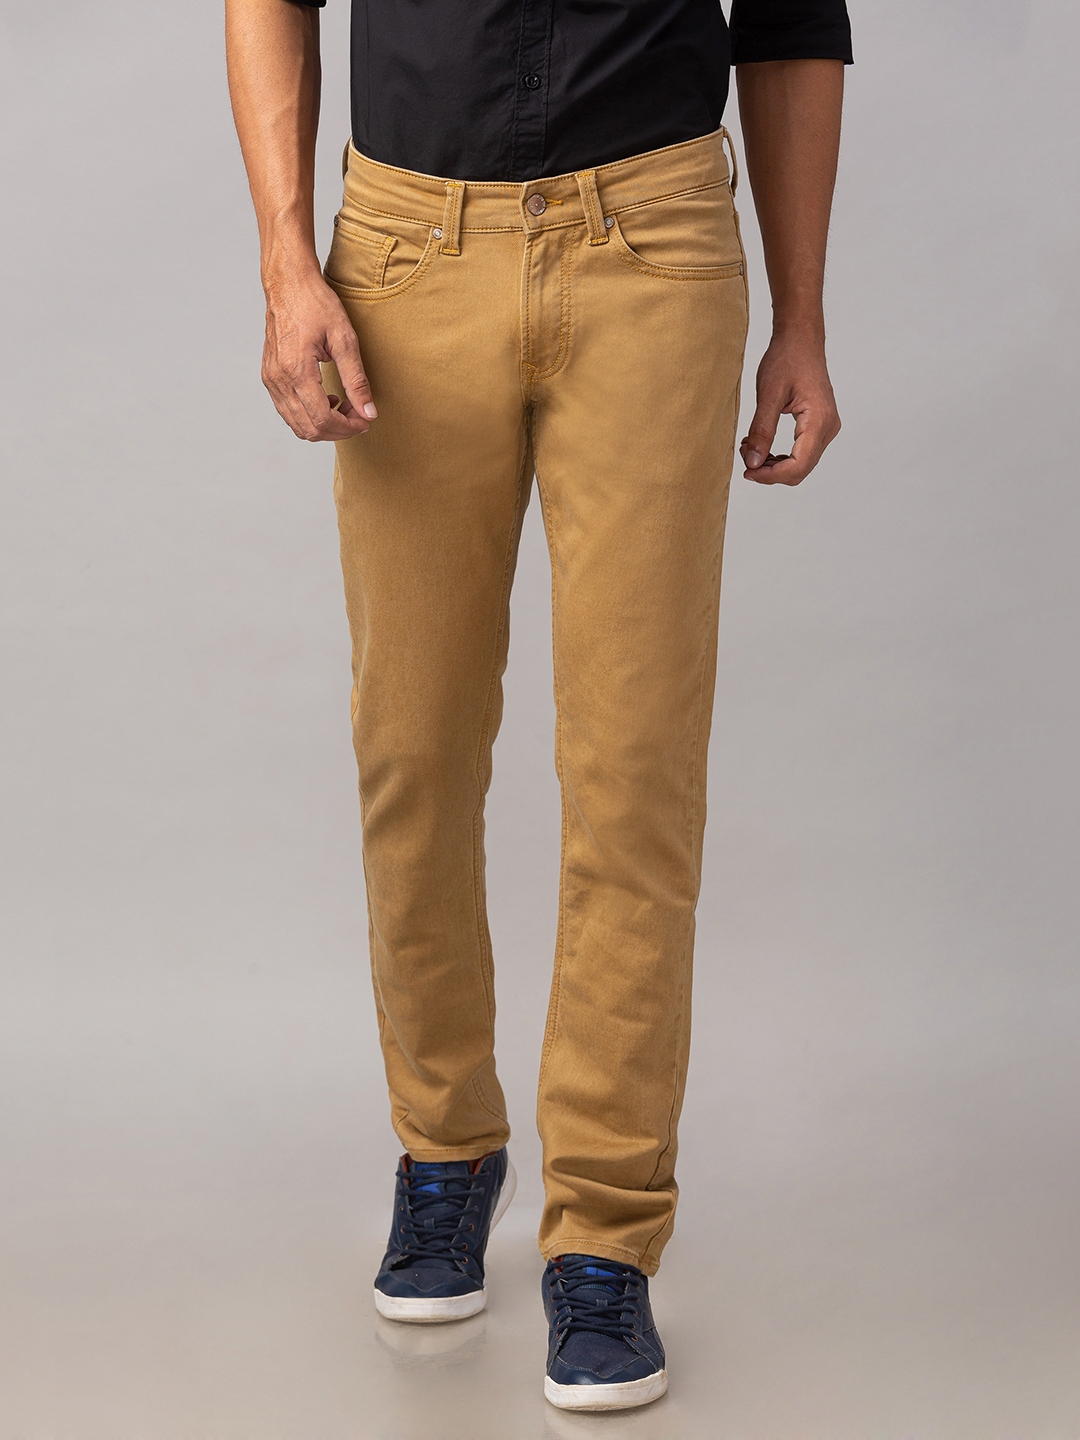 Men's Yellow Cotton Solid Straight Jeans